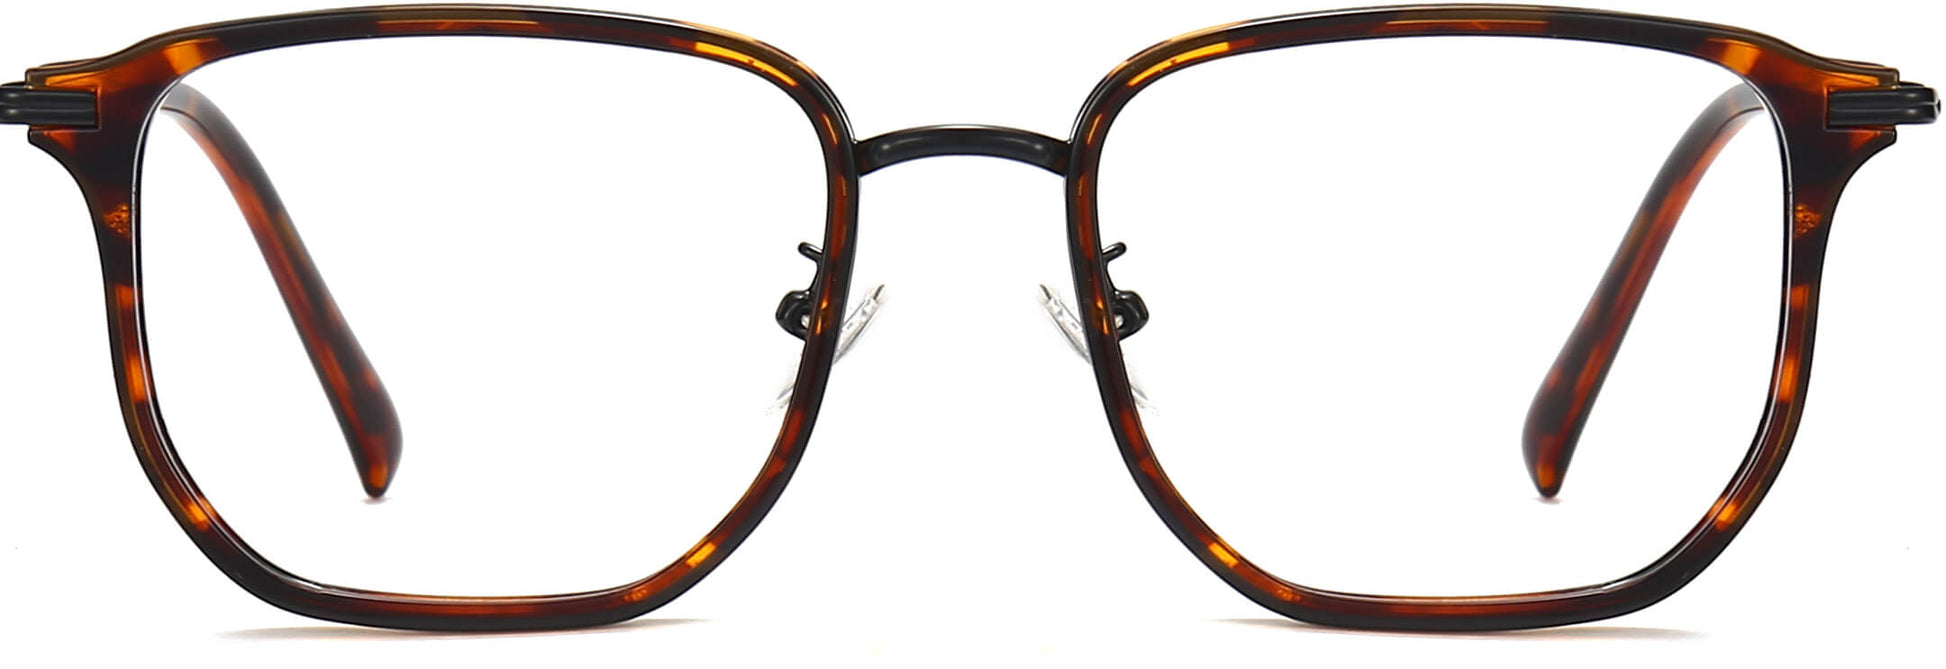 Saoirse Geometric Tortoise Eyeglasses from ANRRI, front view